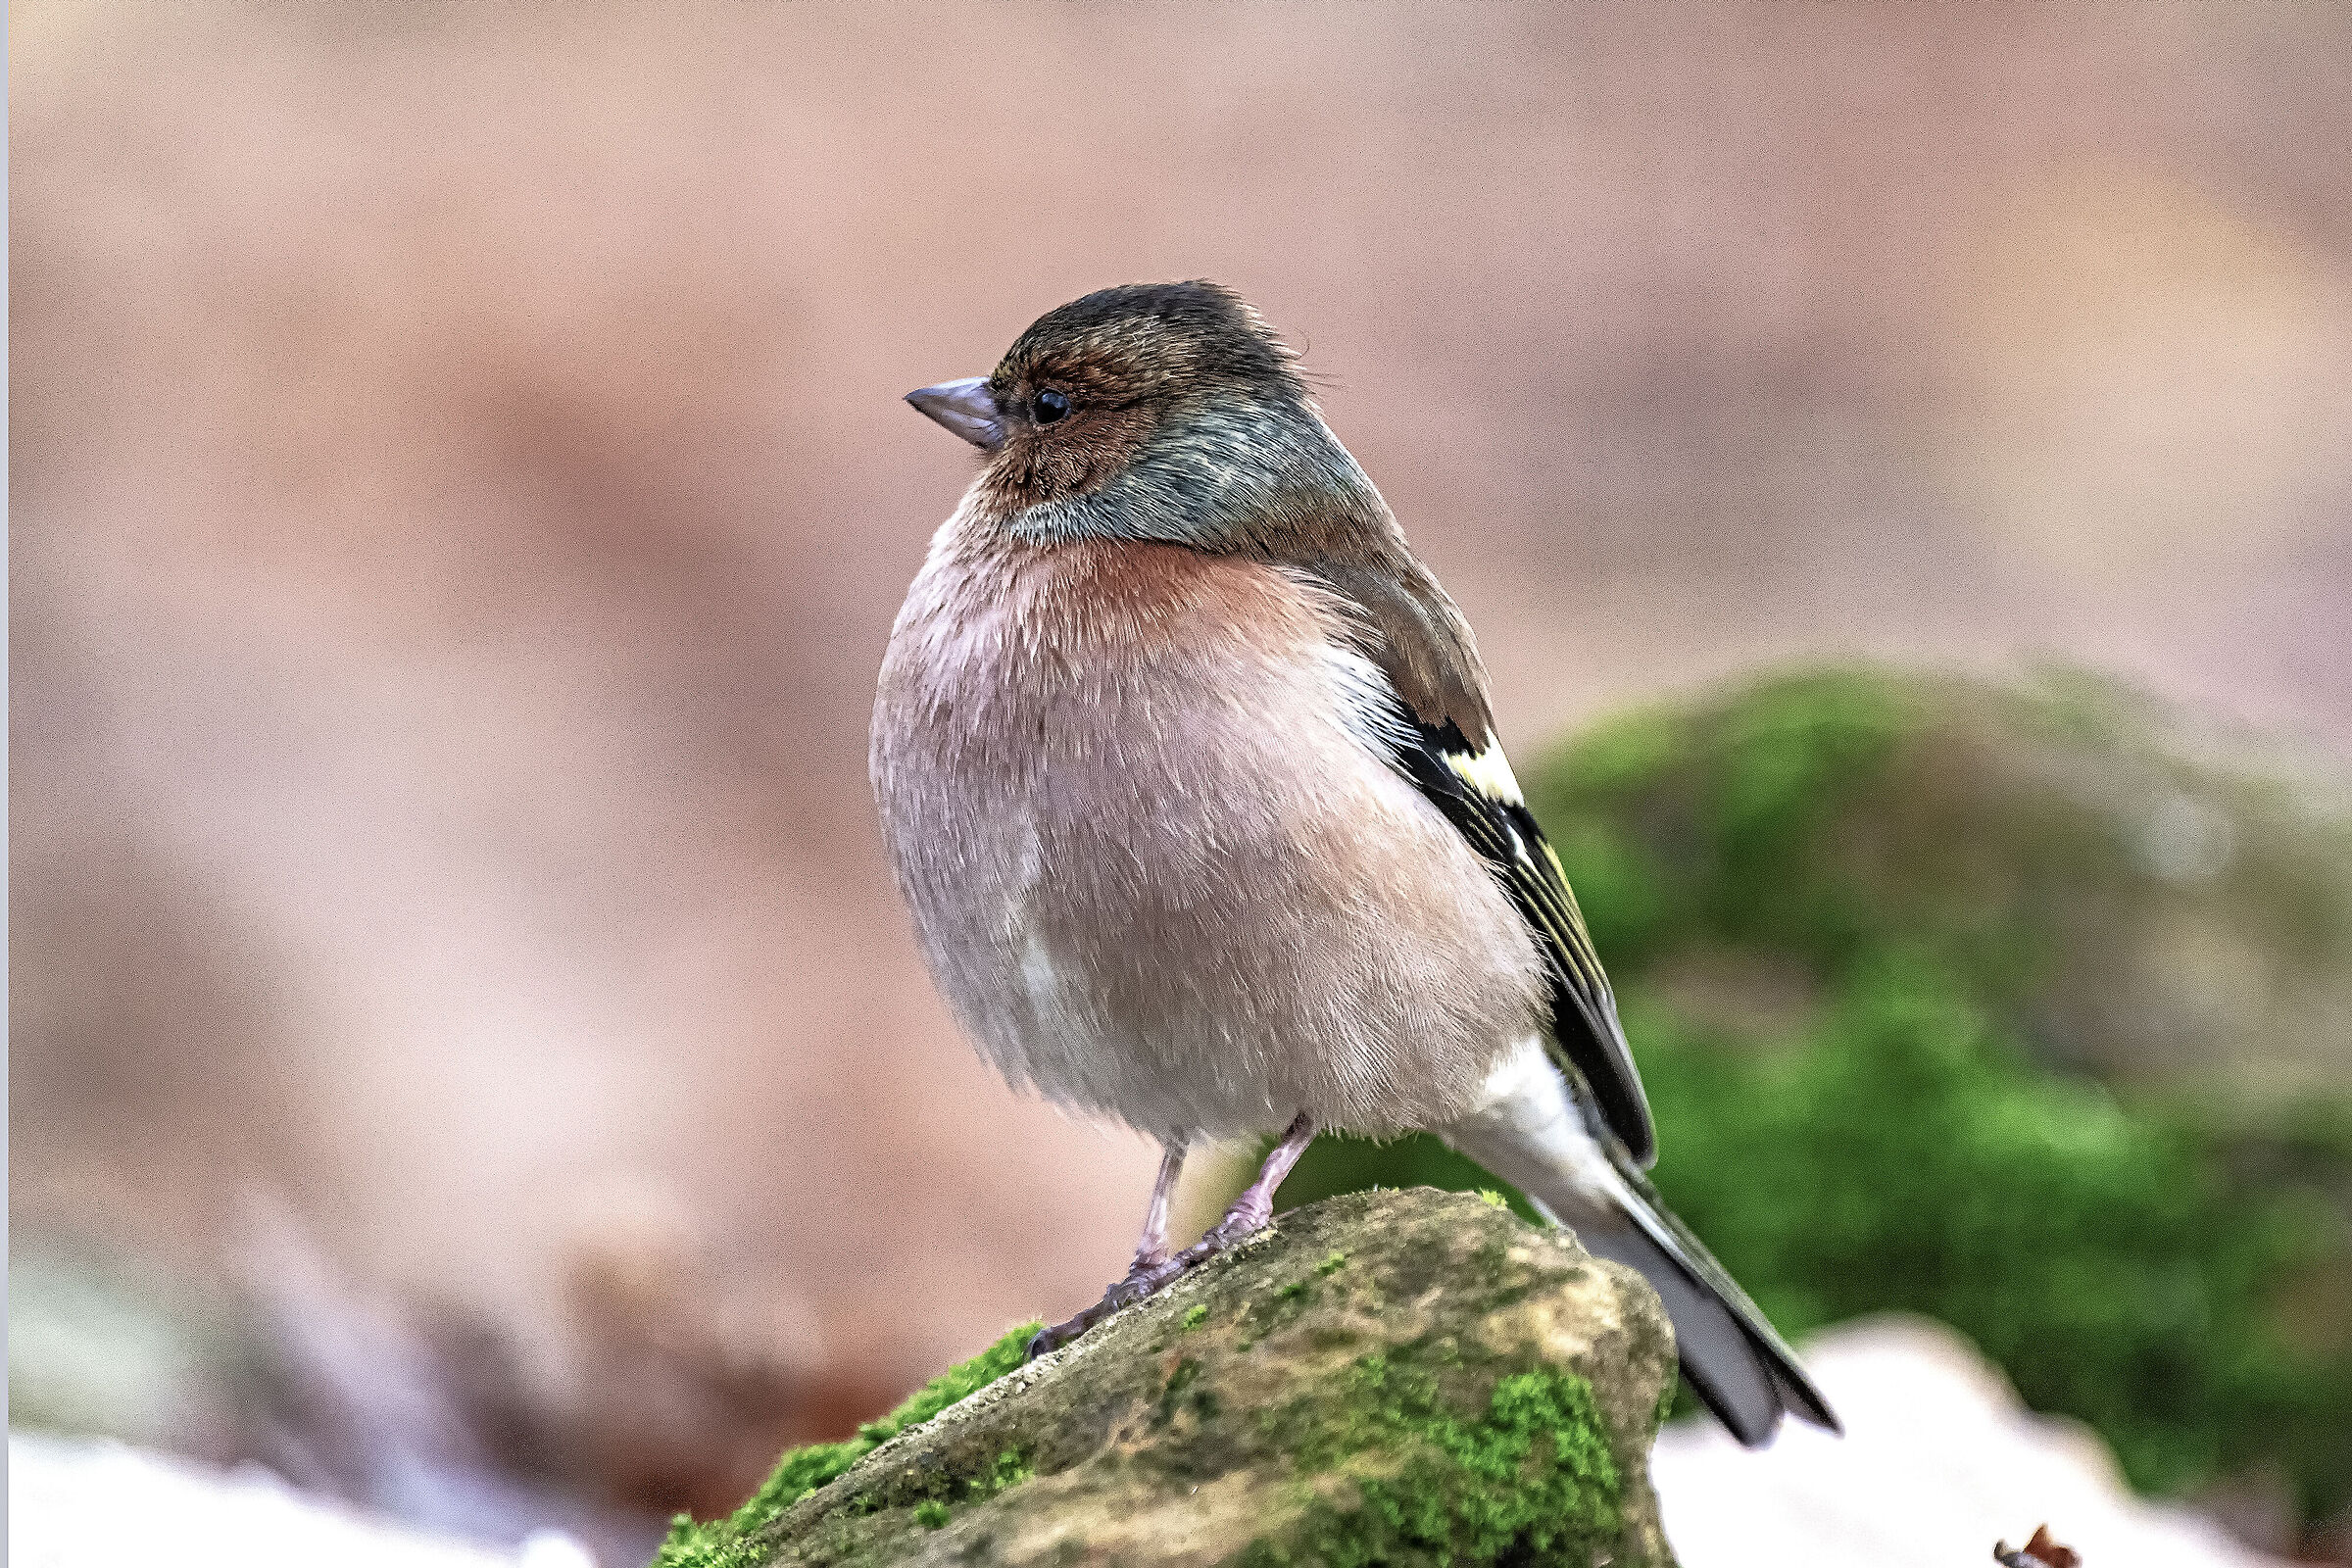 The Chaffinch...